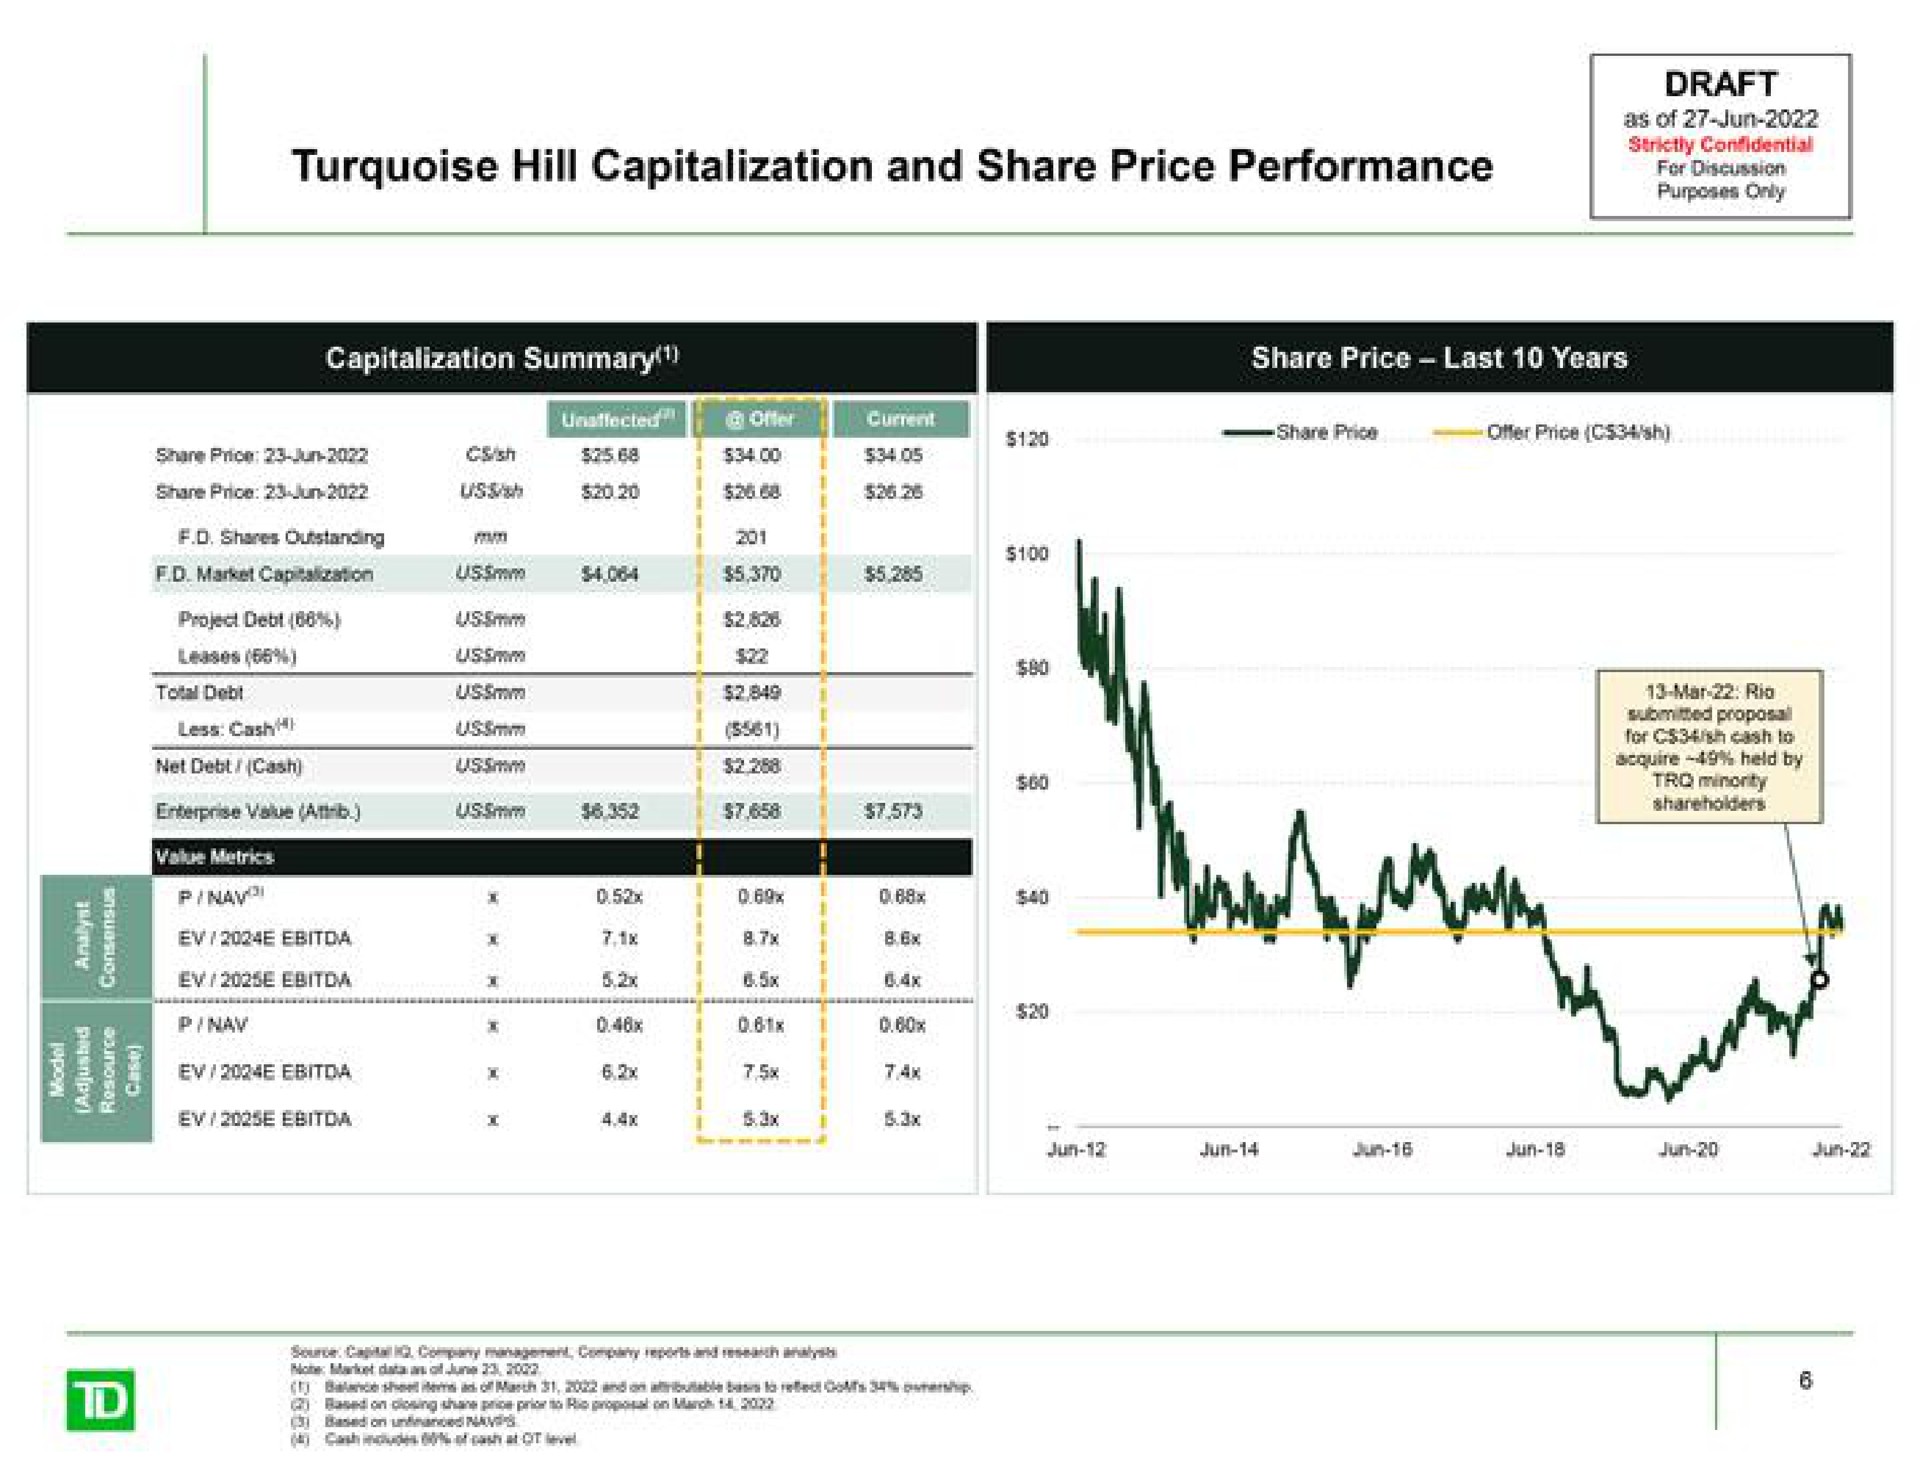 turquoise hill capitalization and share price performance draft as of | TD Securities